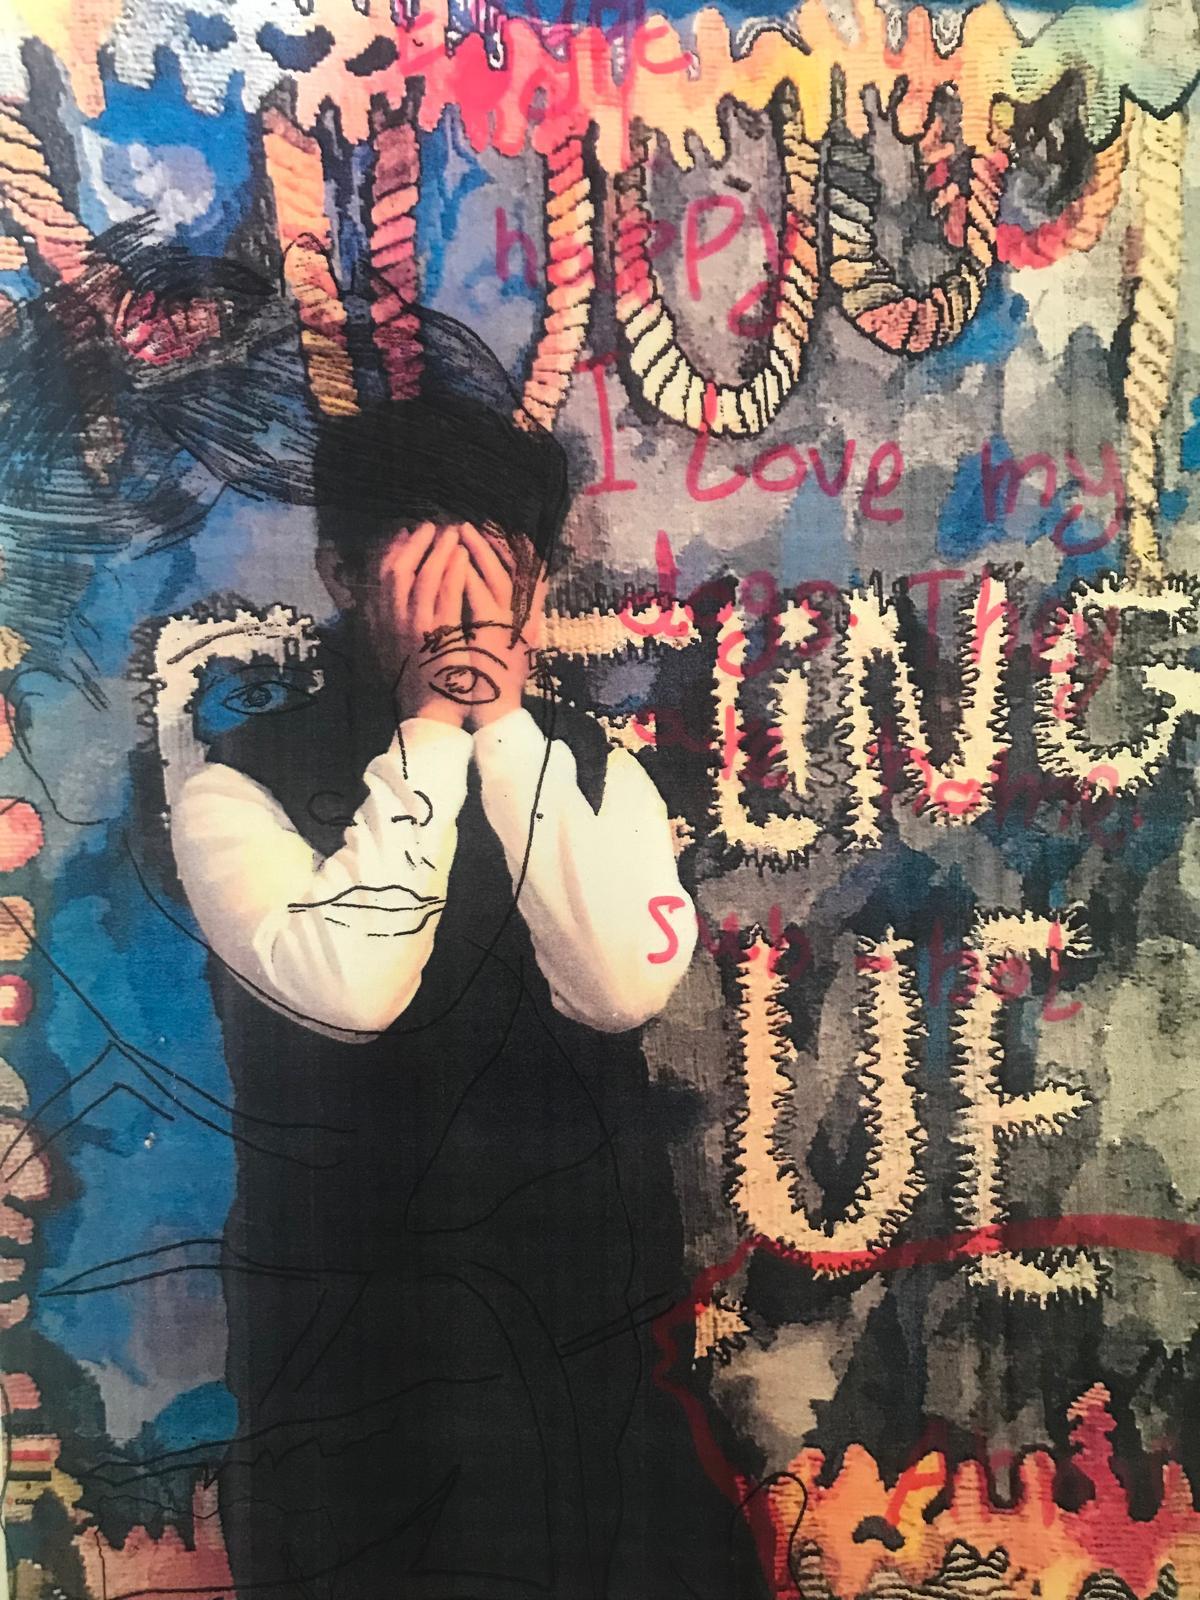 A person stands in front of a colourful artwork, their hands covering their face